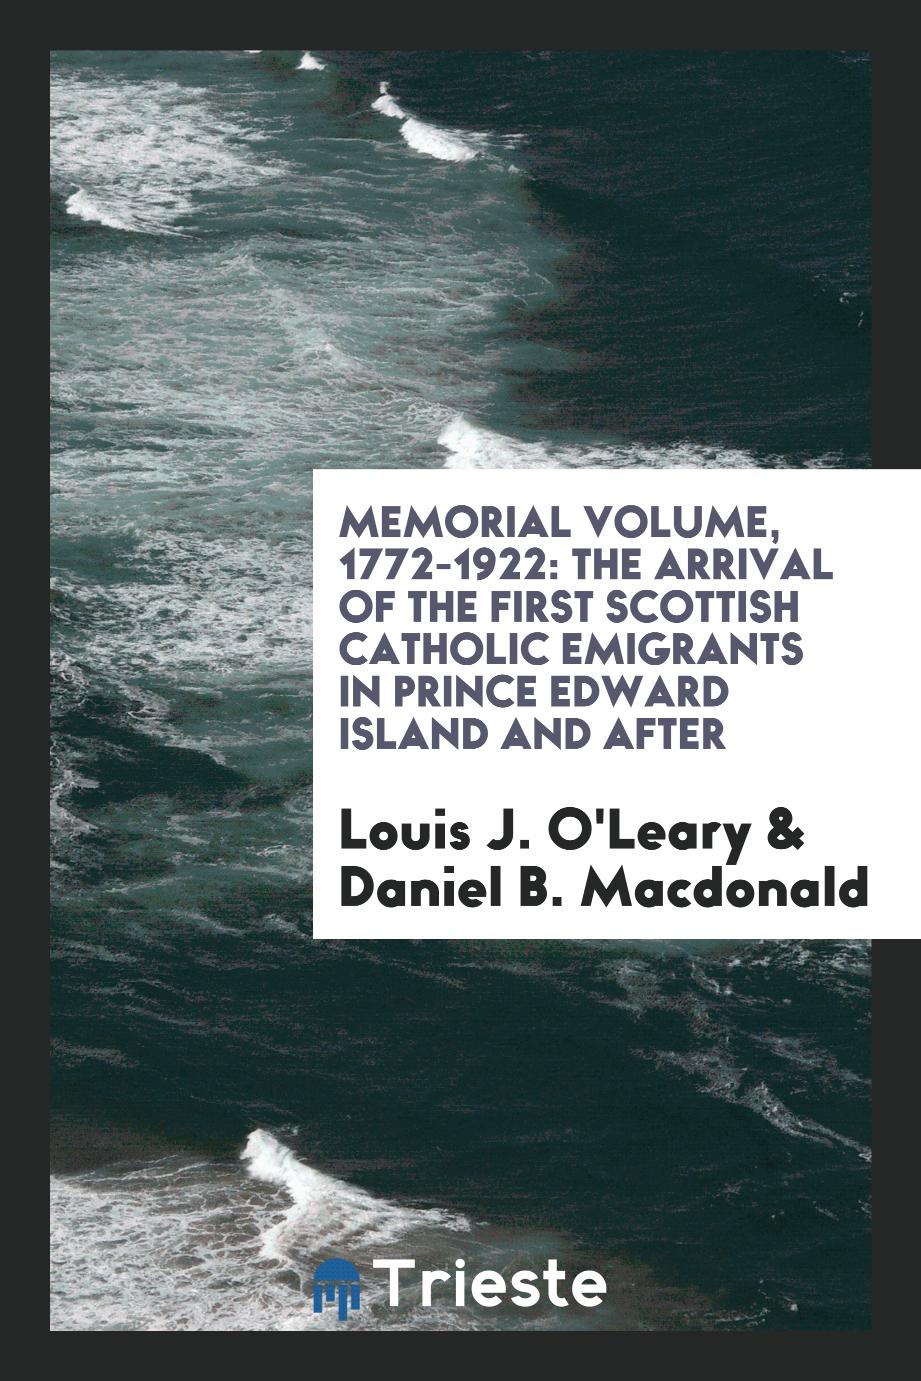 Memorial volume, 1772-1922: the arrival of the first Scottish Catholic emigrants in Prince Edward Island and after